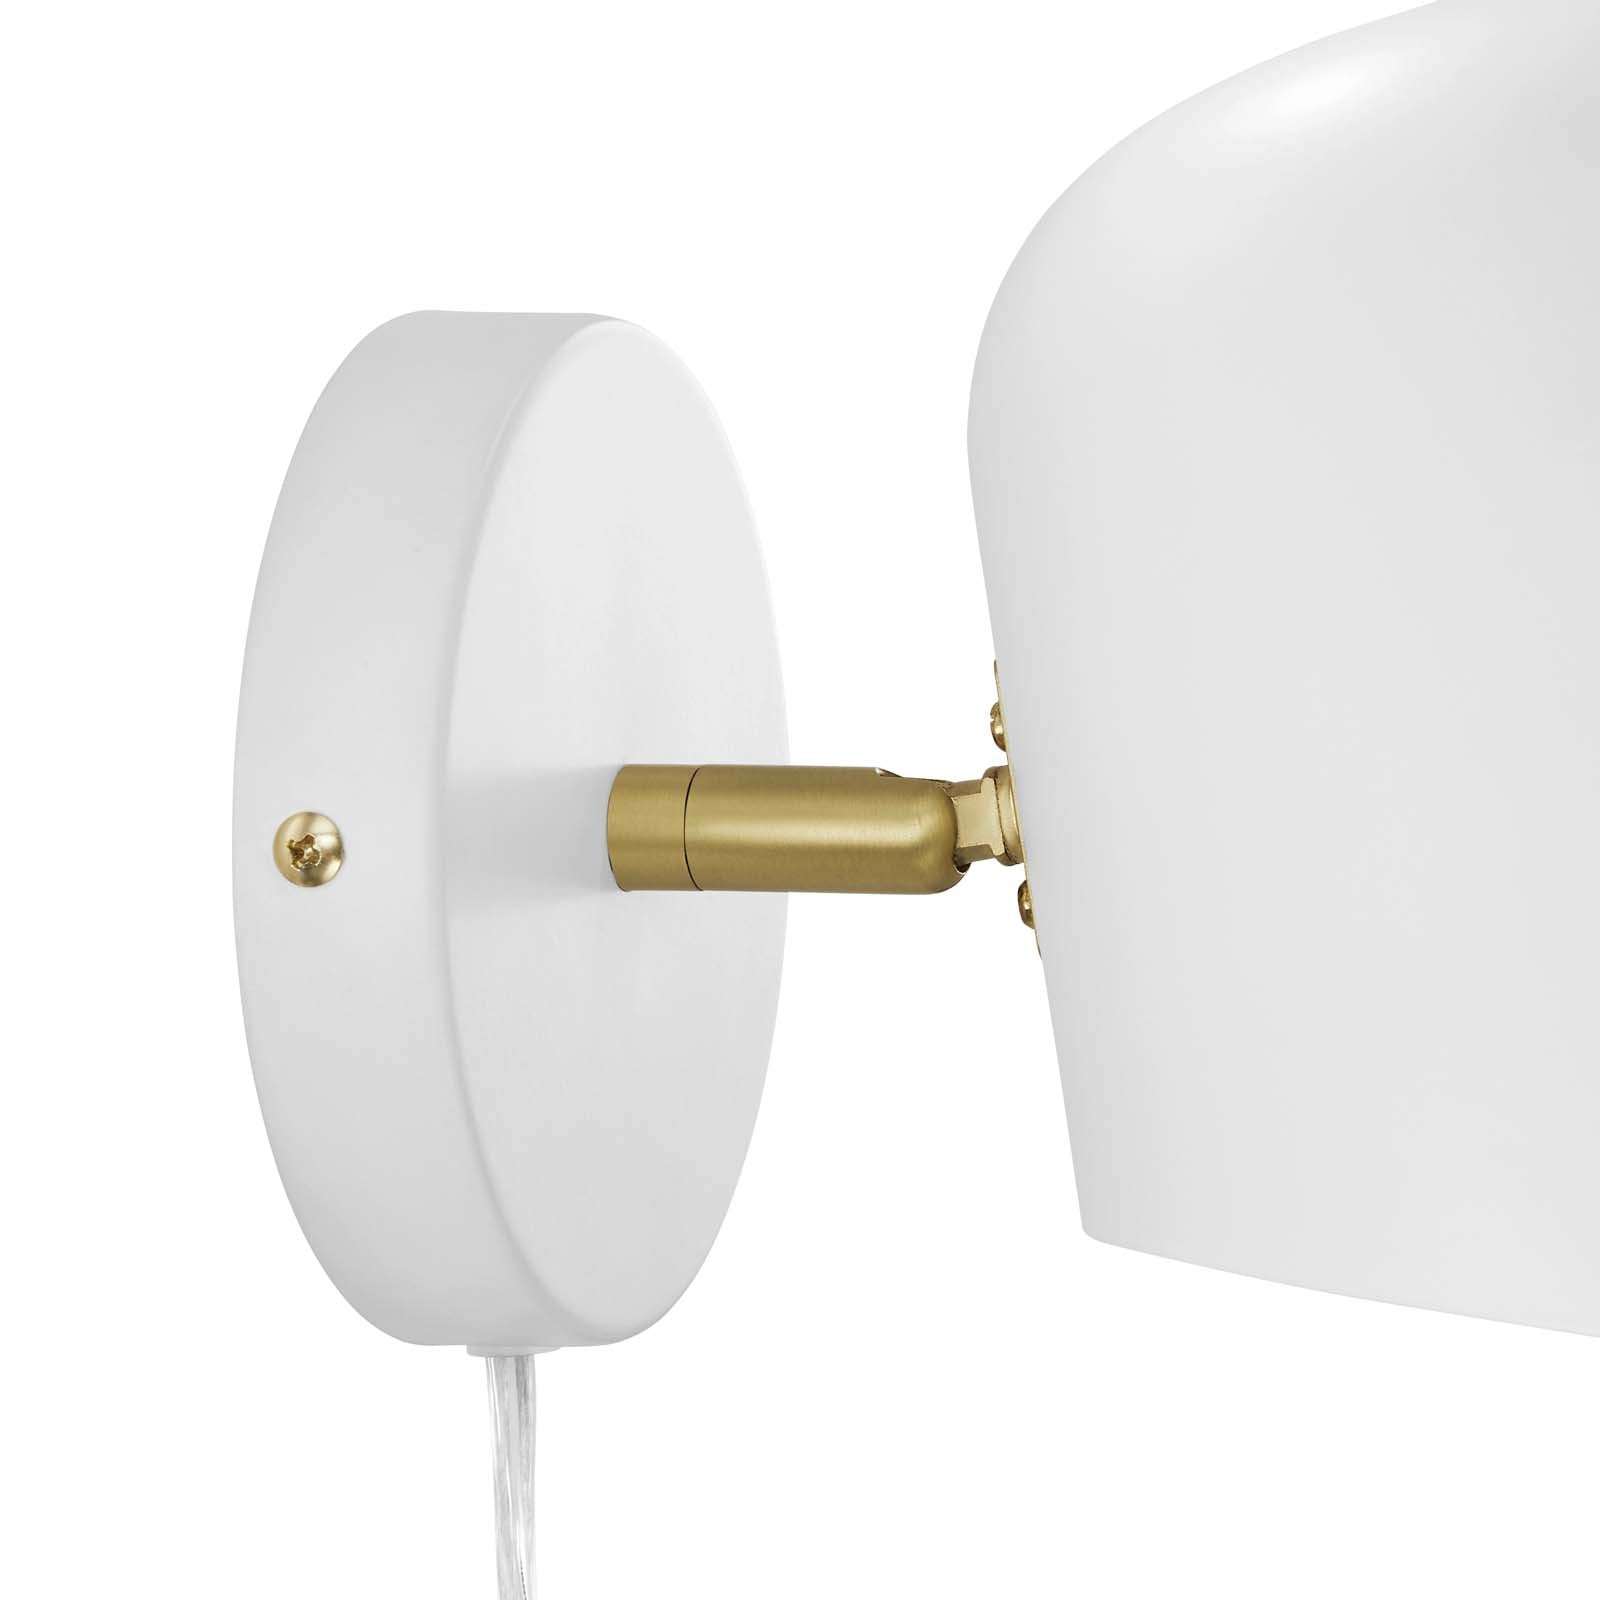 Modway Wall Sconces - Briana Swivel Wall Sconce White